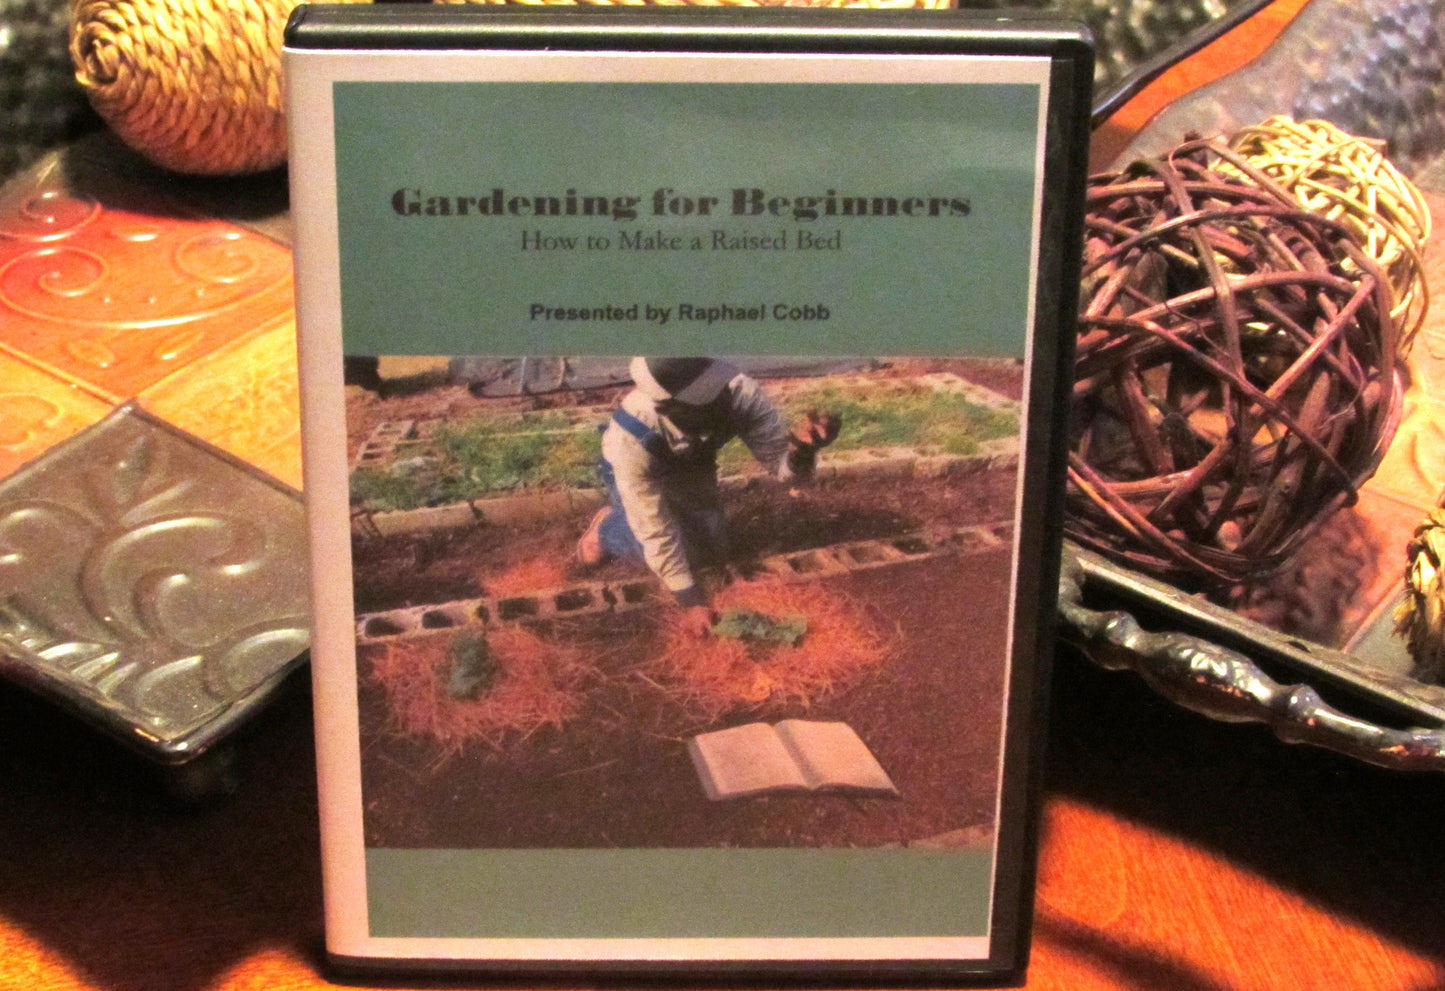 Gardening for Beginners:  How to Make a Raised Bed 5 Disc DVD Set